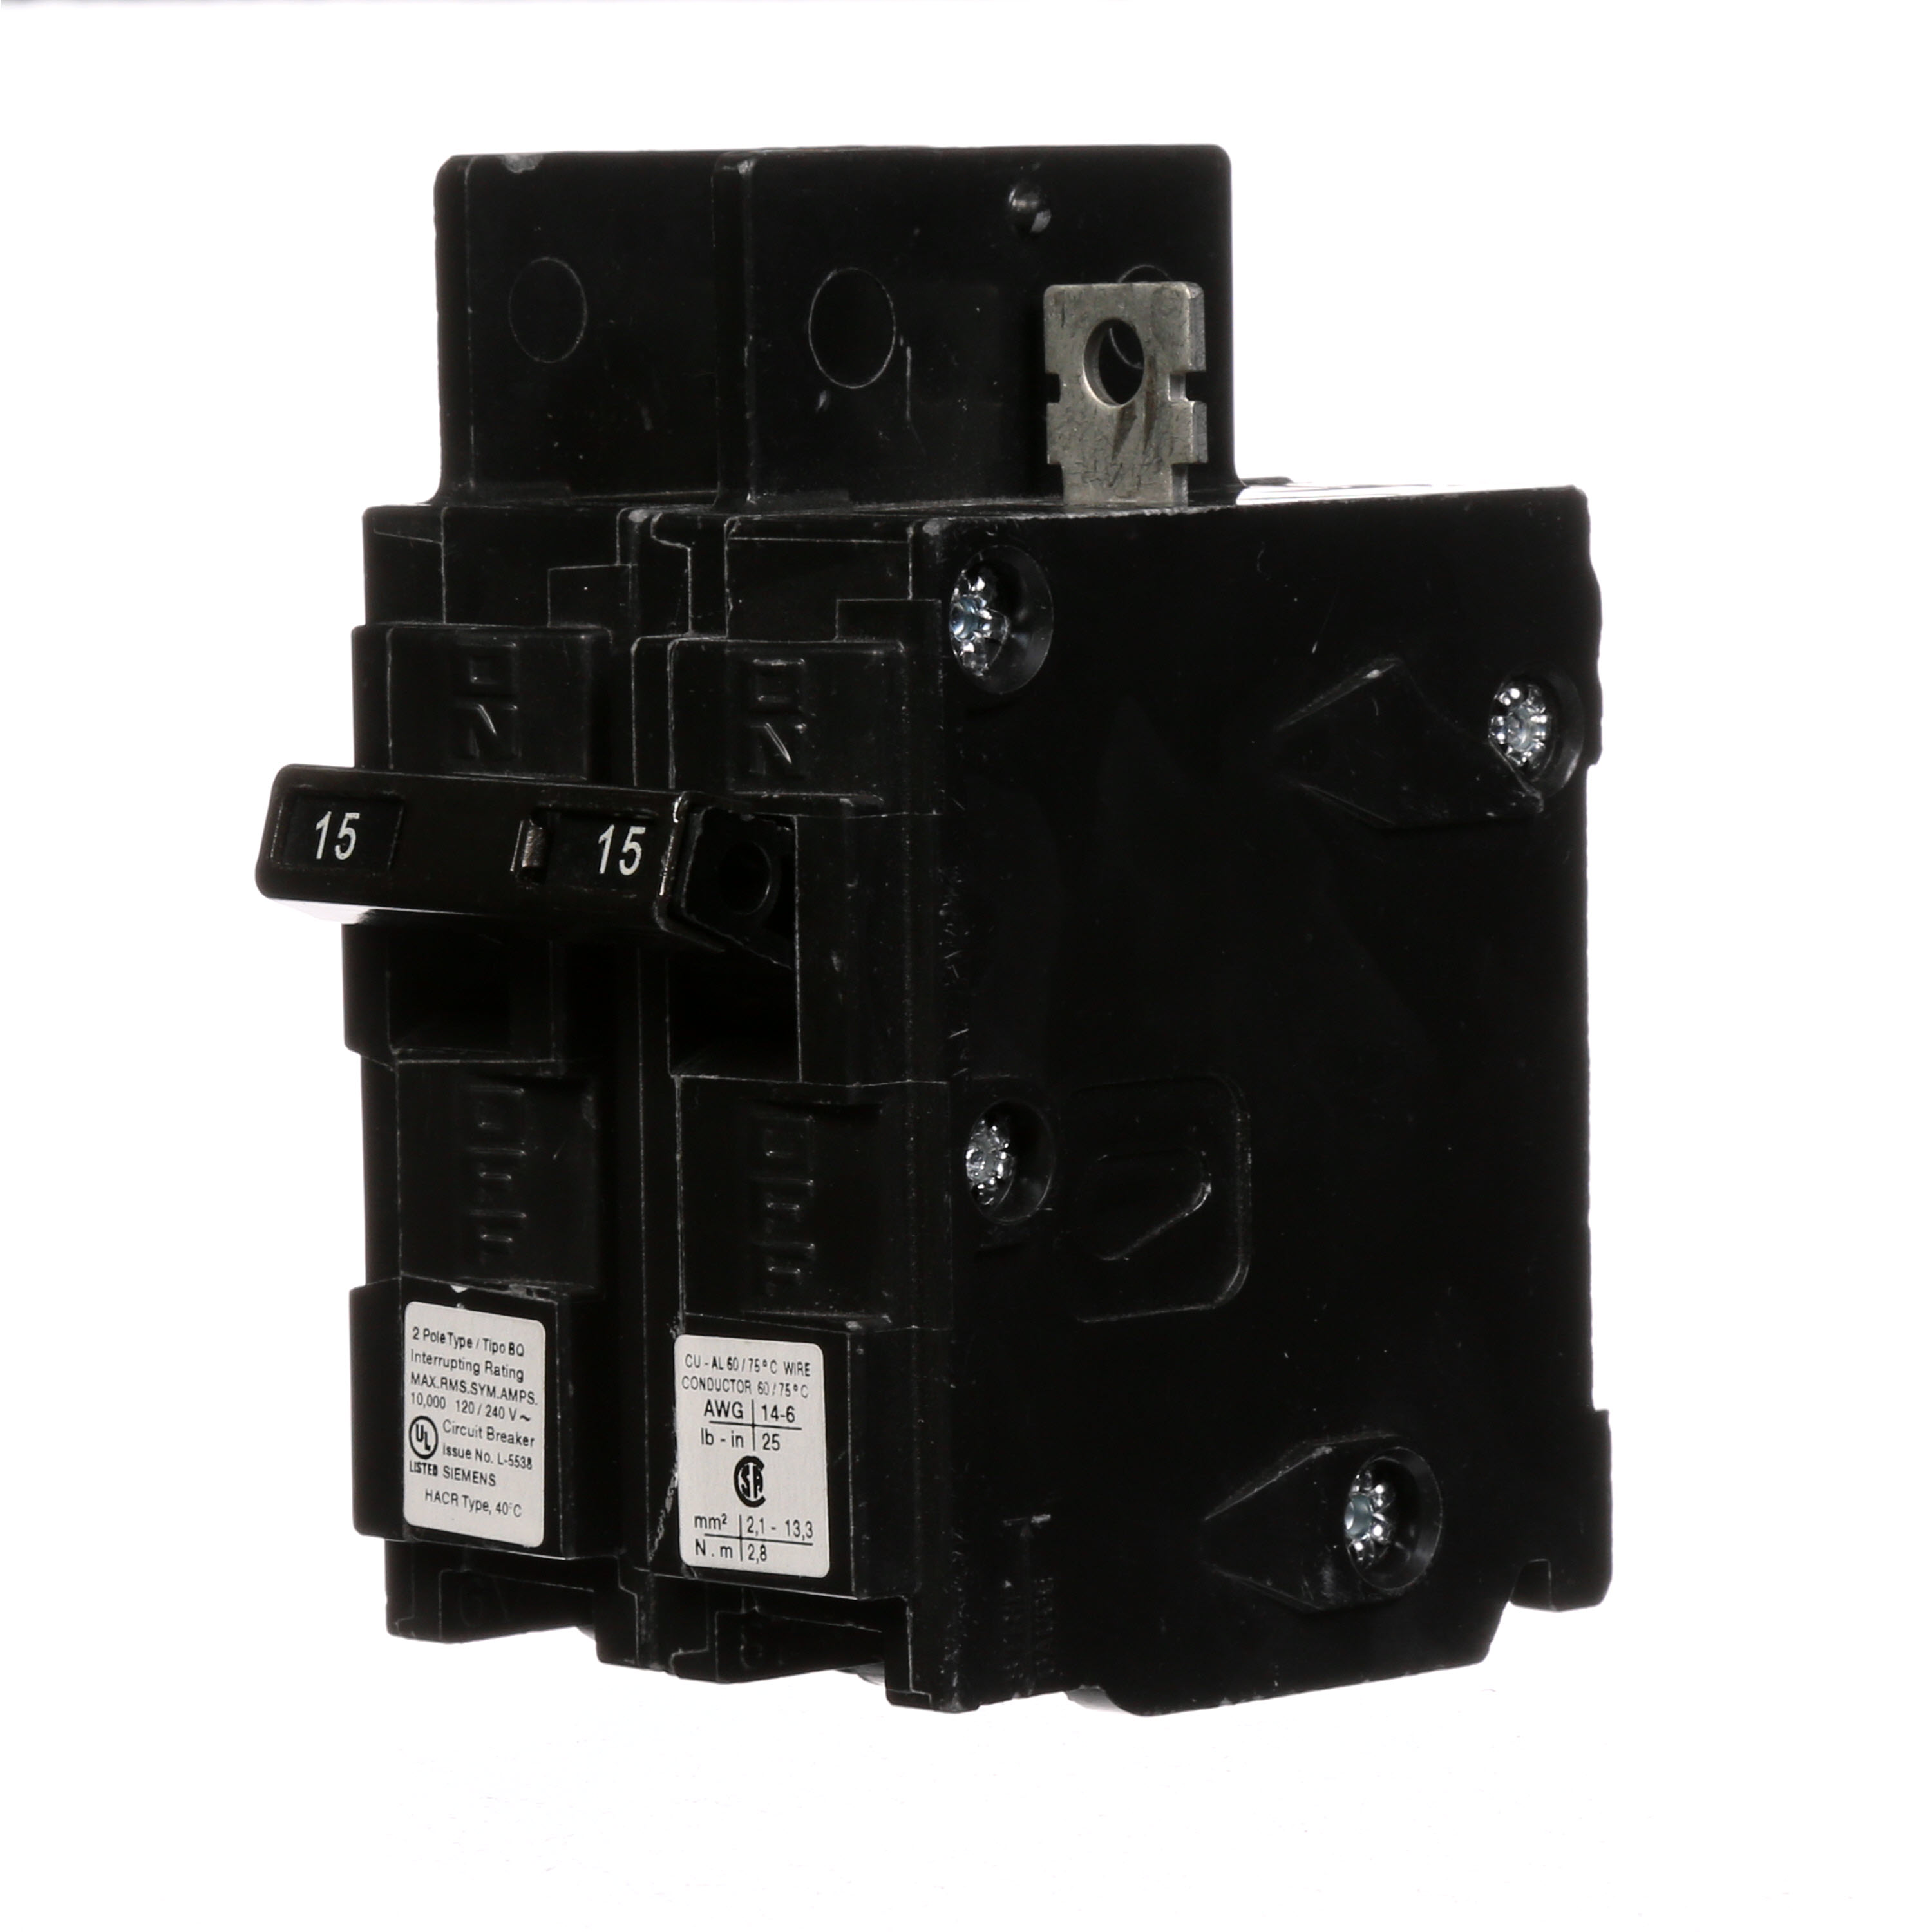 Siemens Low Voltage Molded Case Circuit Breakers General Purpose MCCBs - Type BQ, 2-Pole, 120/240VAC are Circuit Protection Molded Case Circuit Breakers. 2-Pole Common-Trip circuit breaker type BQ. Rated 120/240V (015A) (AIR 10 kA). Special features Load side lugs are included.